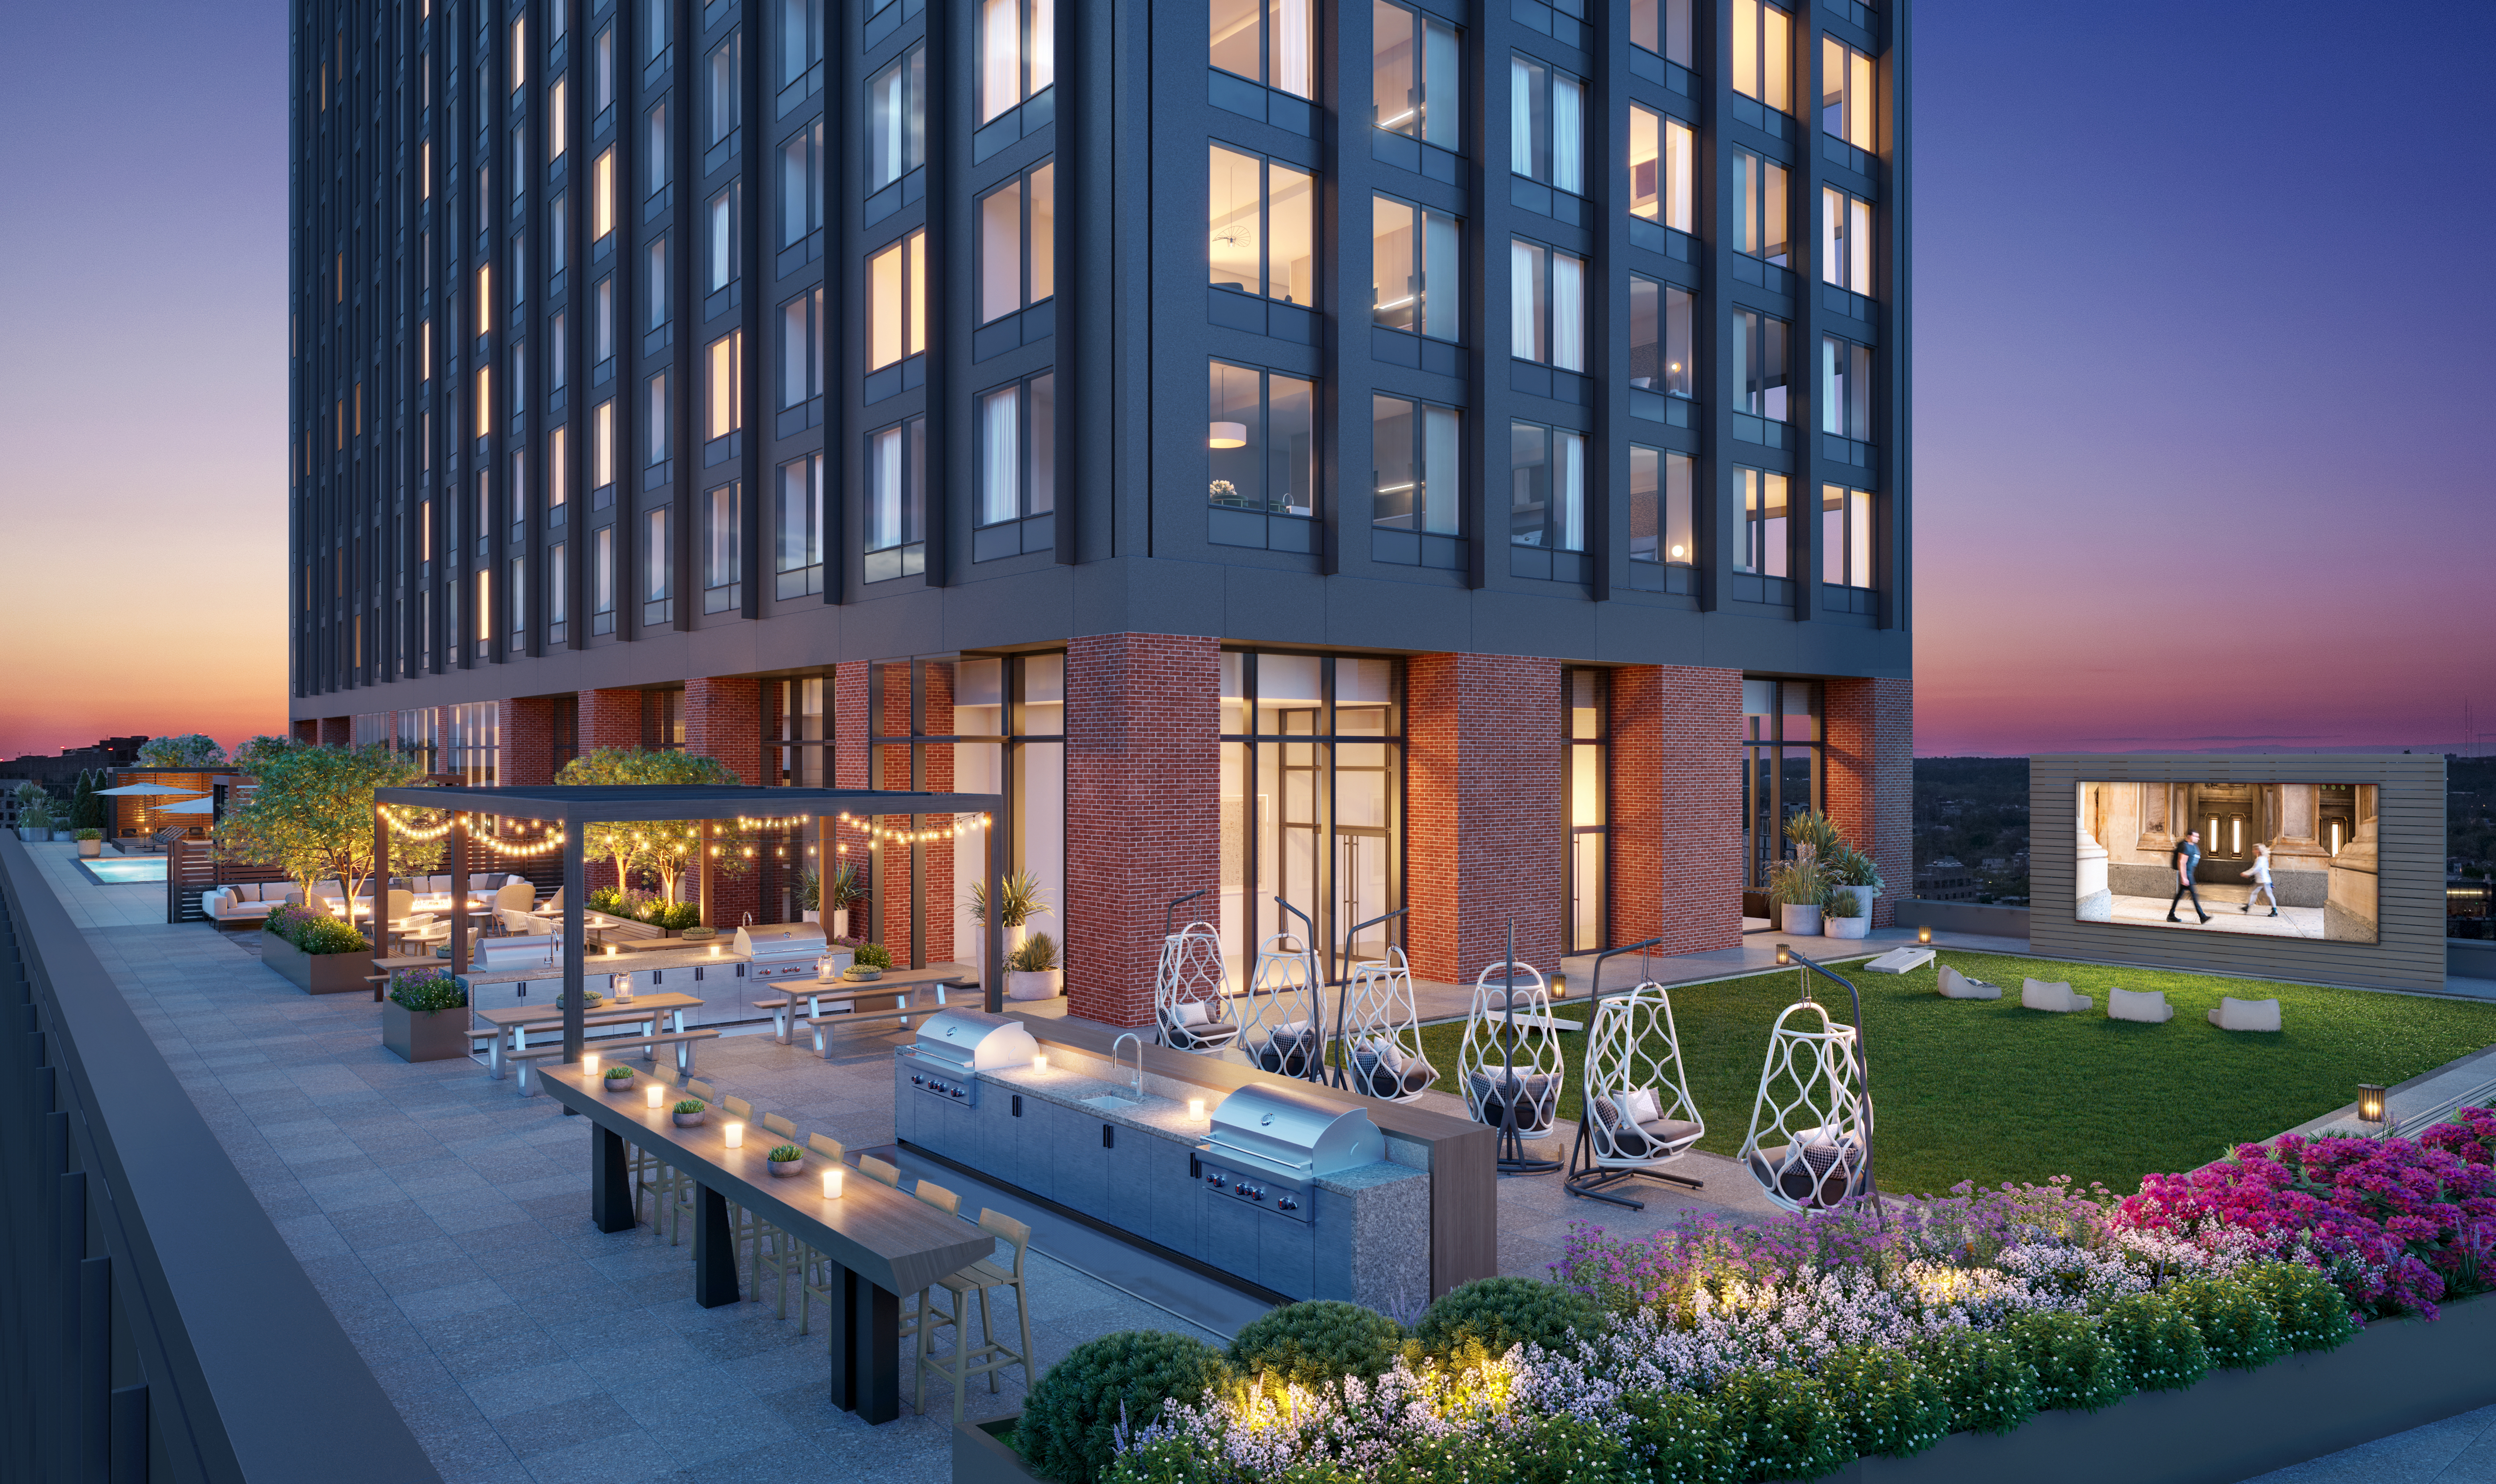 With Avira, Schuylkill Yards Welcomes Its First Residents